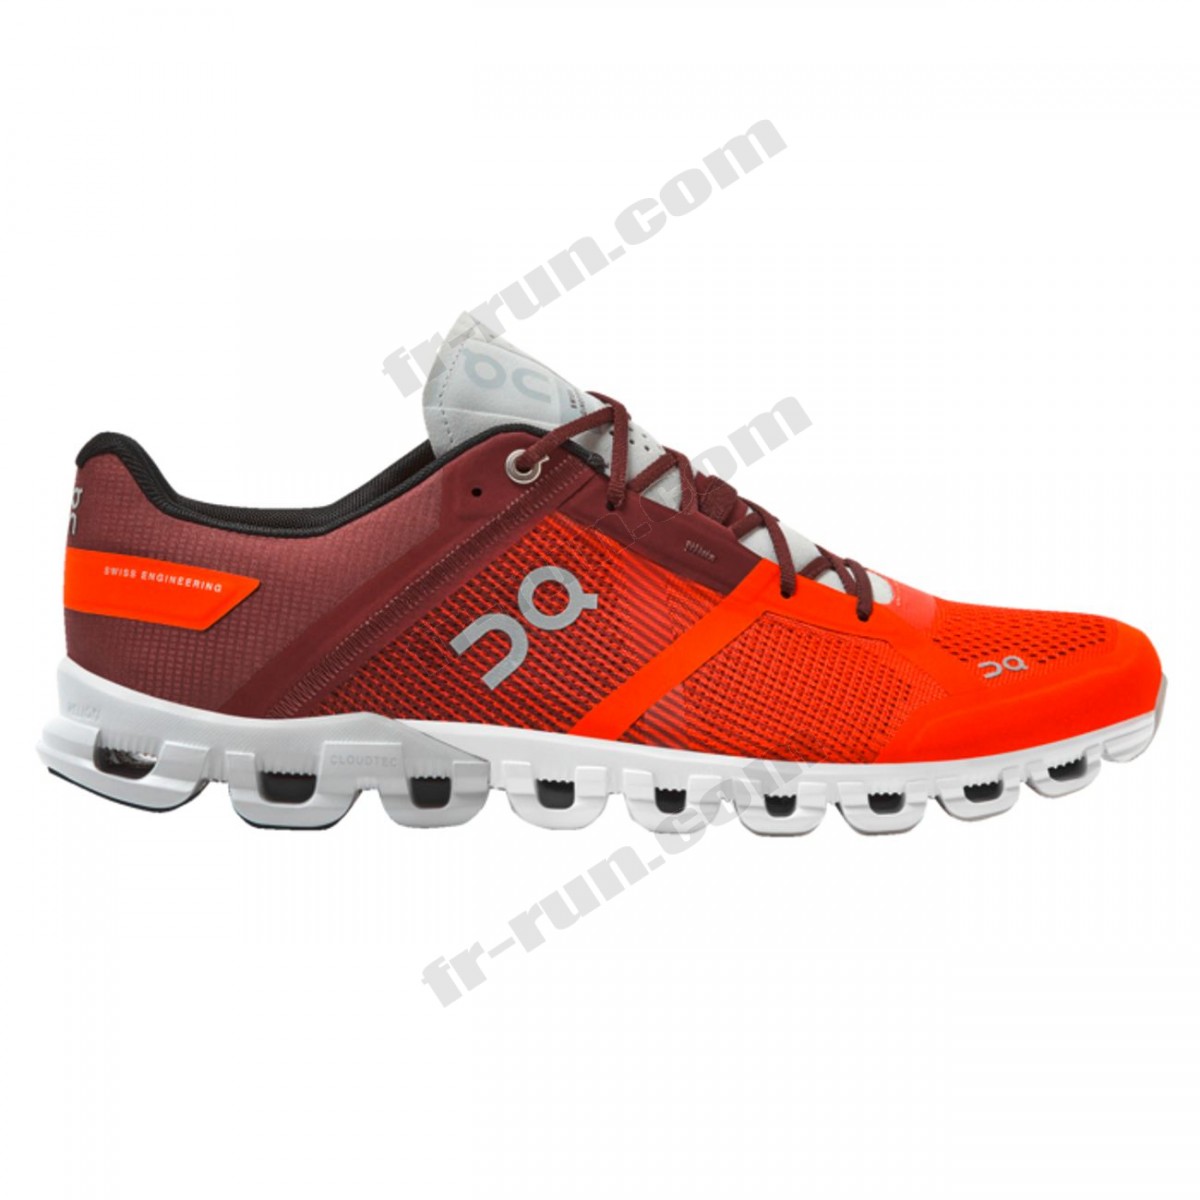 On/CHAUSSURES BASSES running femme ON CLOUDFLOW √ Nouveau style √ Soldes - -0